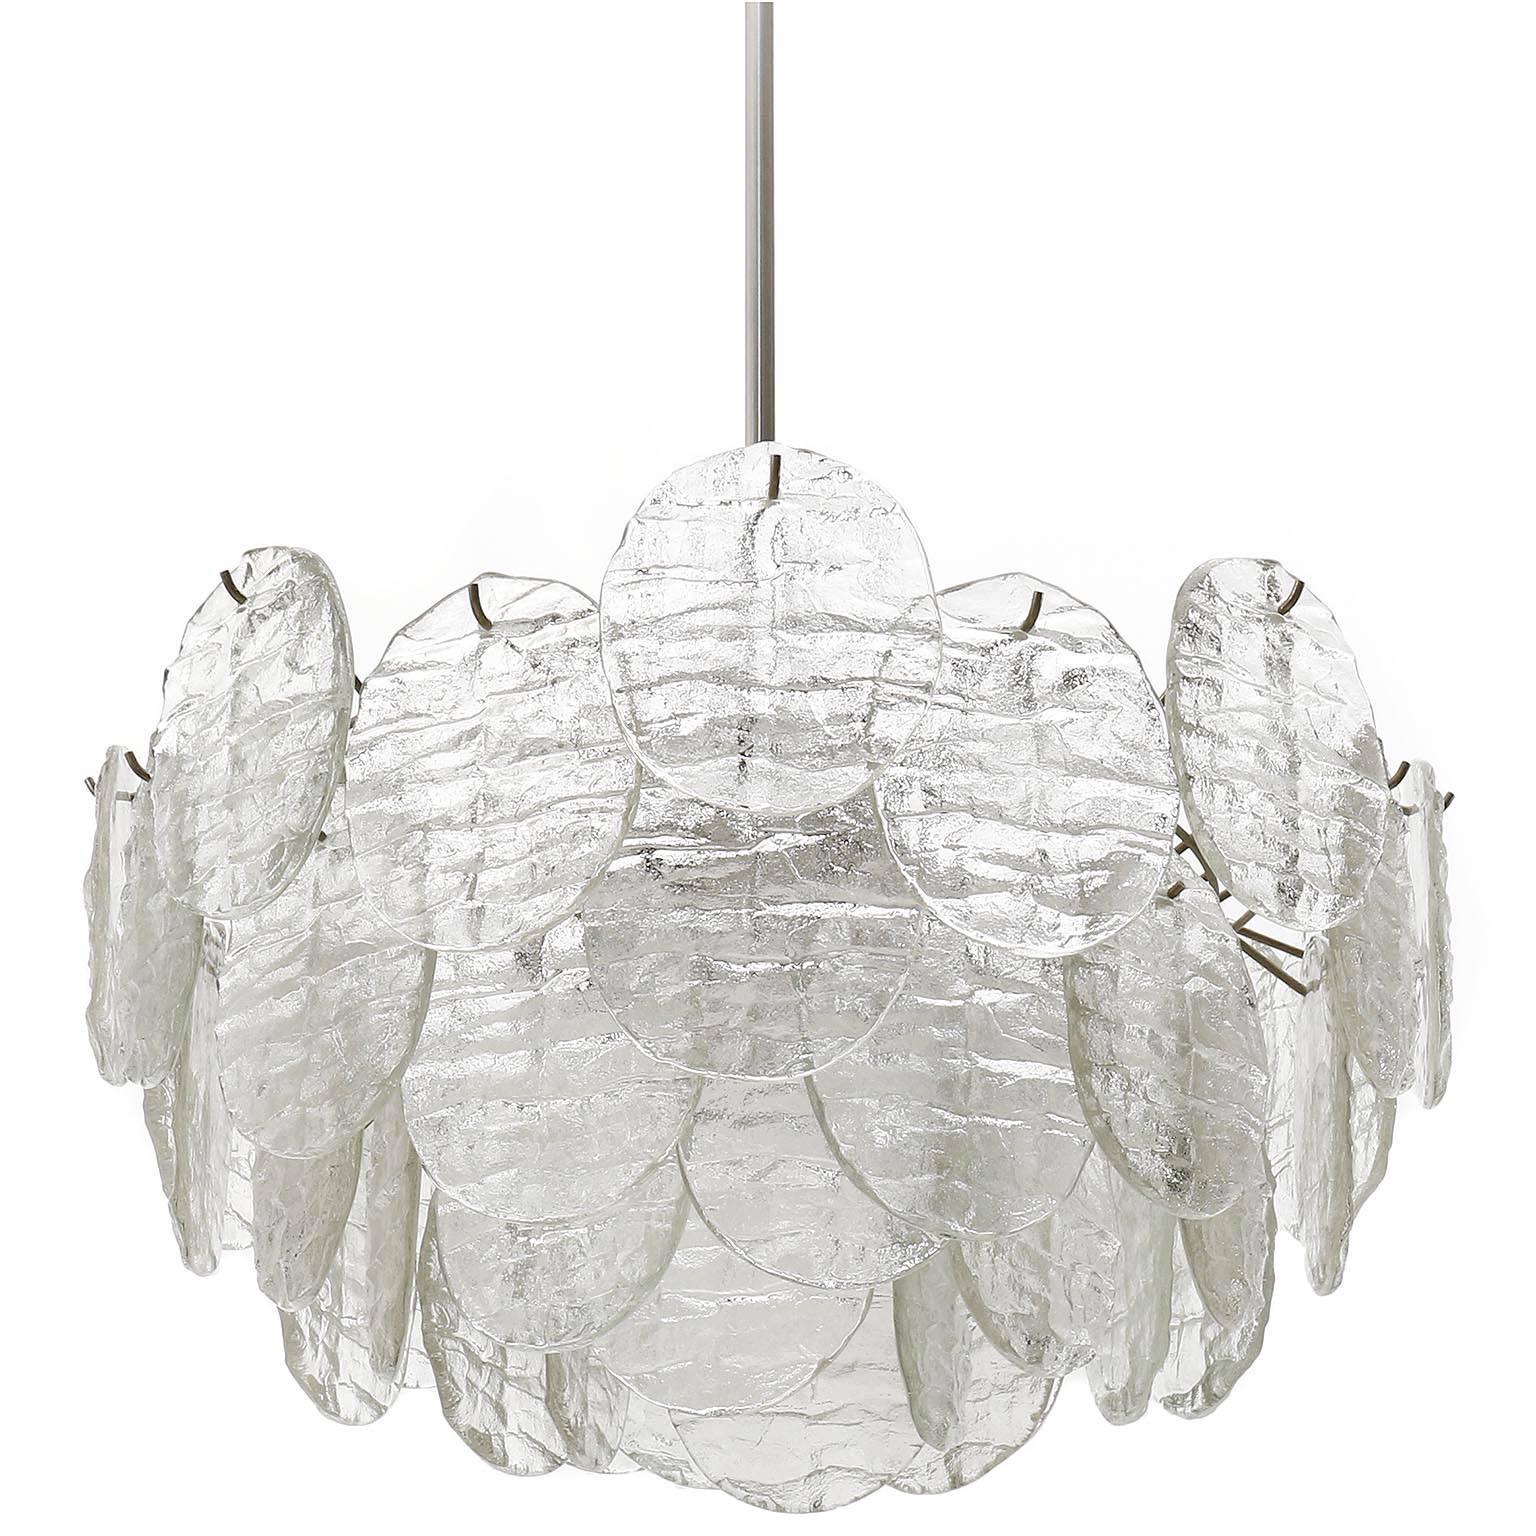 A large light fixtures model 'Blatt' (Blatt is the German word for leaf) by J.T. Kalmar, Austria, manufactured in midcentury, circa 1970 (late 1960s or early 1970s).
44 disc shaped clear glasses in the form of leaves hang on a nickel-plated